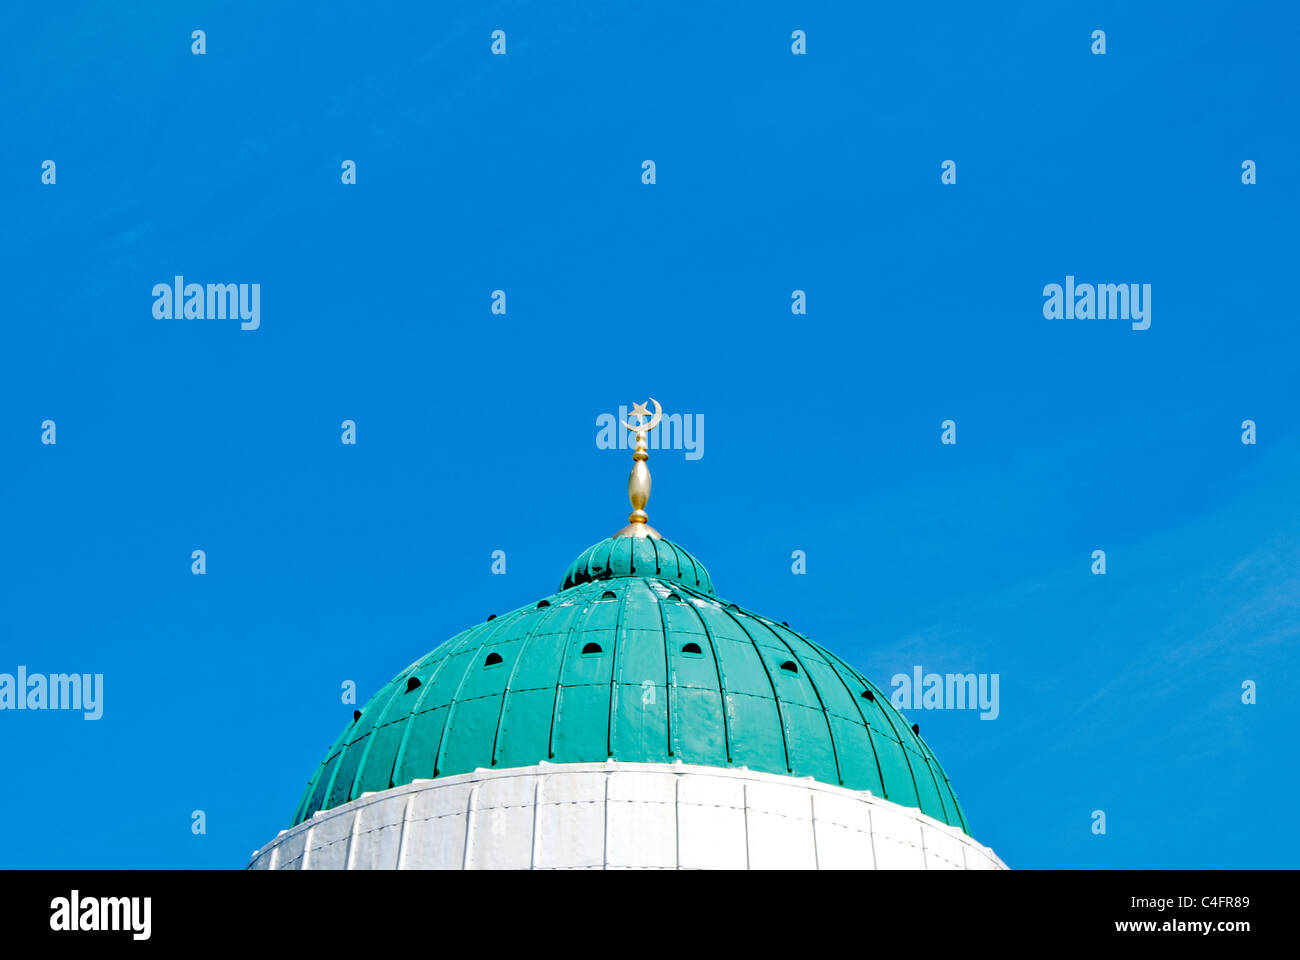 The Green and White Dome of a Mosque in West Yorkshire under a Blue Sky Stock Photo